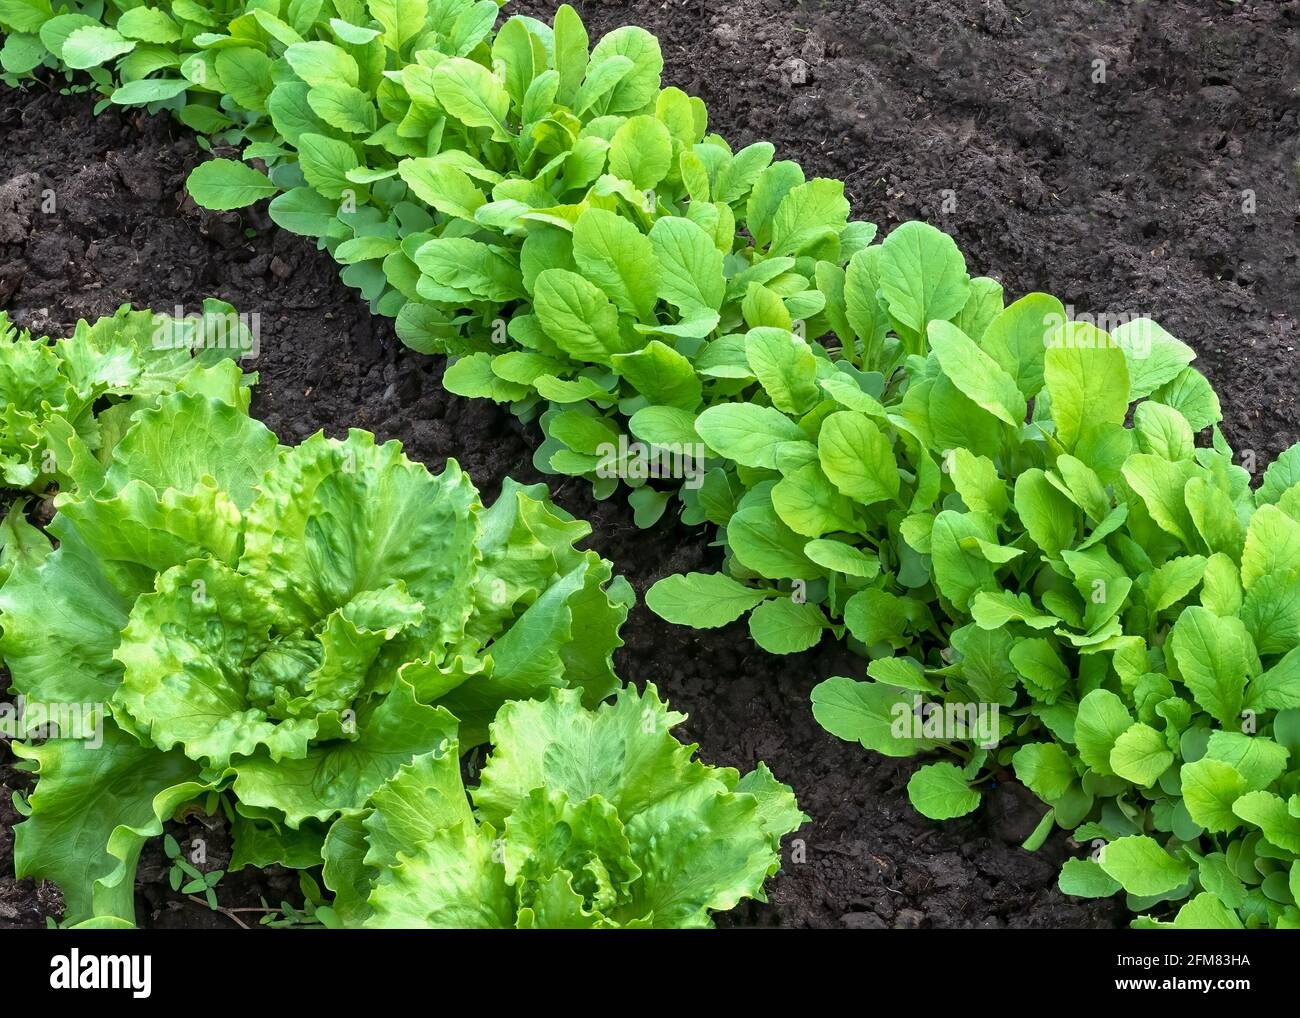 rows of young lettuce plants growing in a poly tunnel protected from frost controlled environment on an allotment garden or small holding , copy space Stock Photo